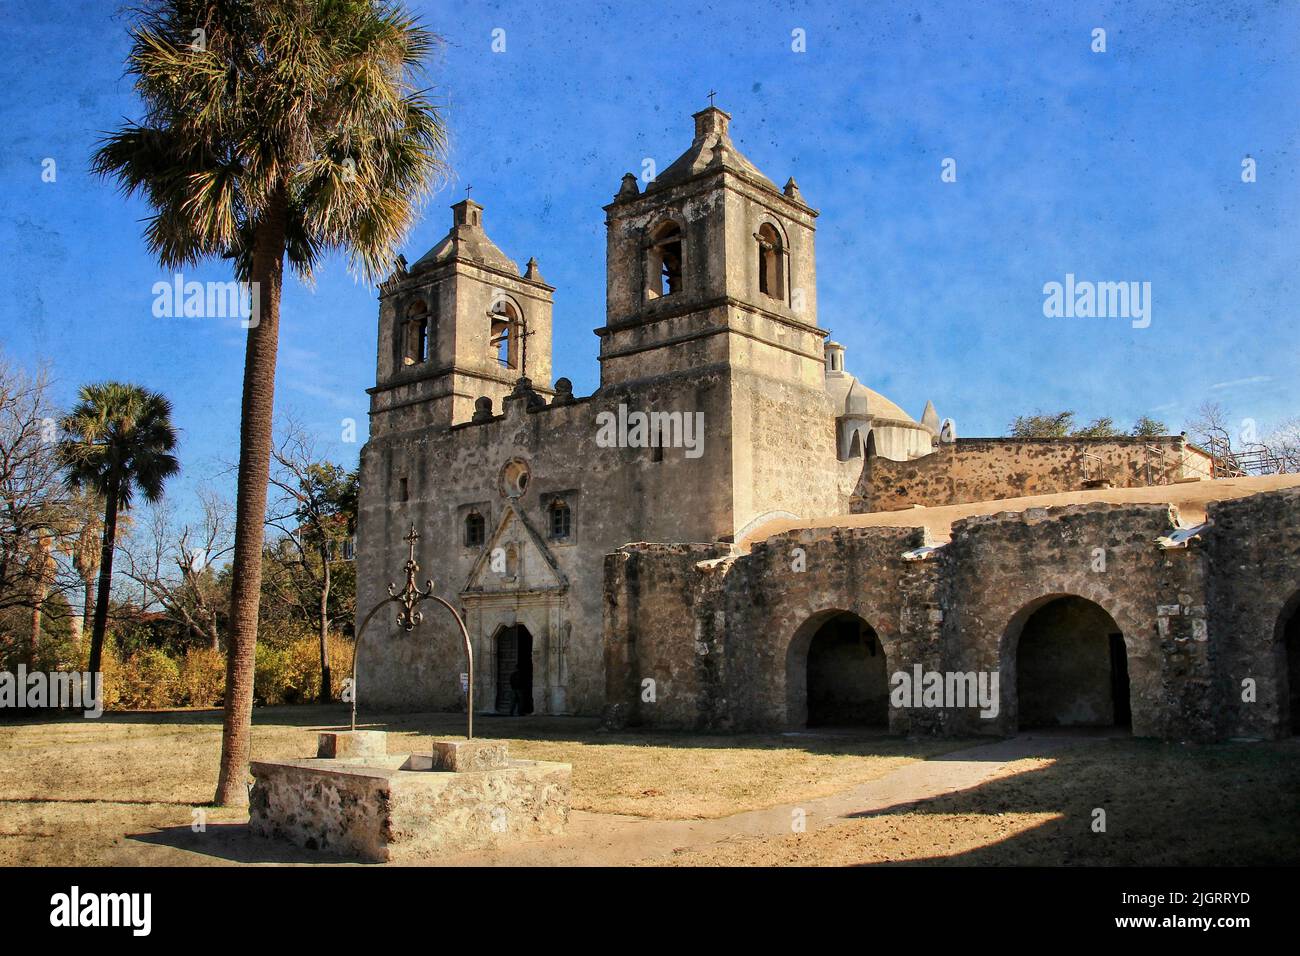 Mission Concepcion, San Antonio, Texas: This is a textured photograph of an old Spanish stone mission, with blue skies, arches, and a well.. Stock Photo